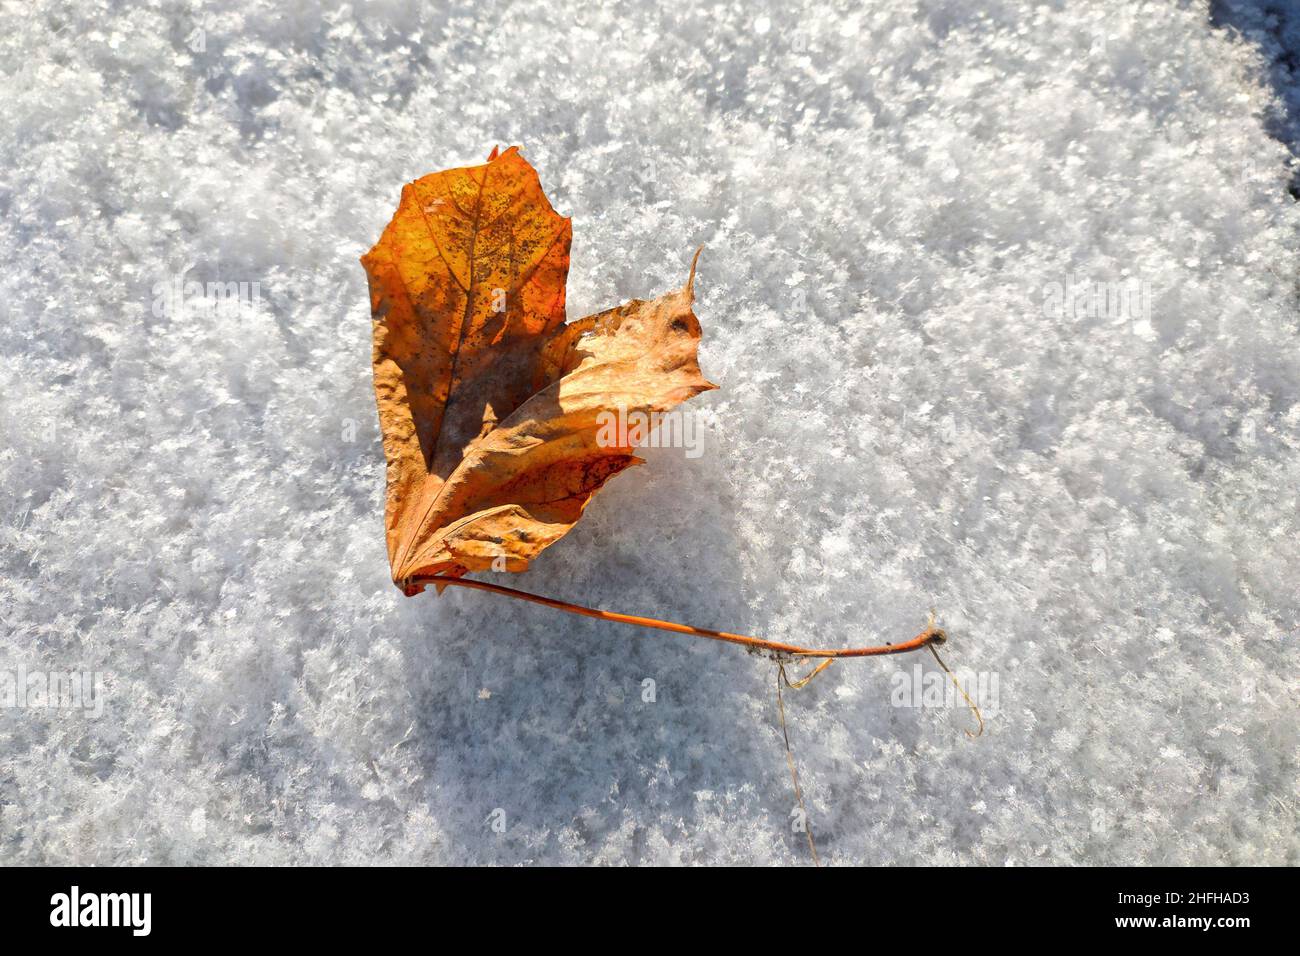 Dry maple leaf on top of the first snowfall in winter. Stock Photo